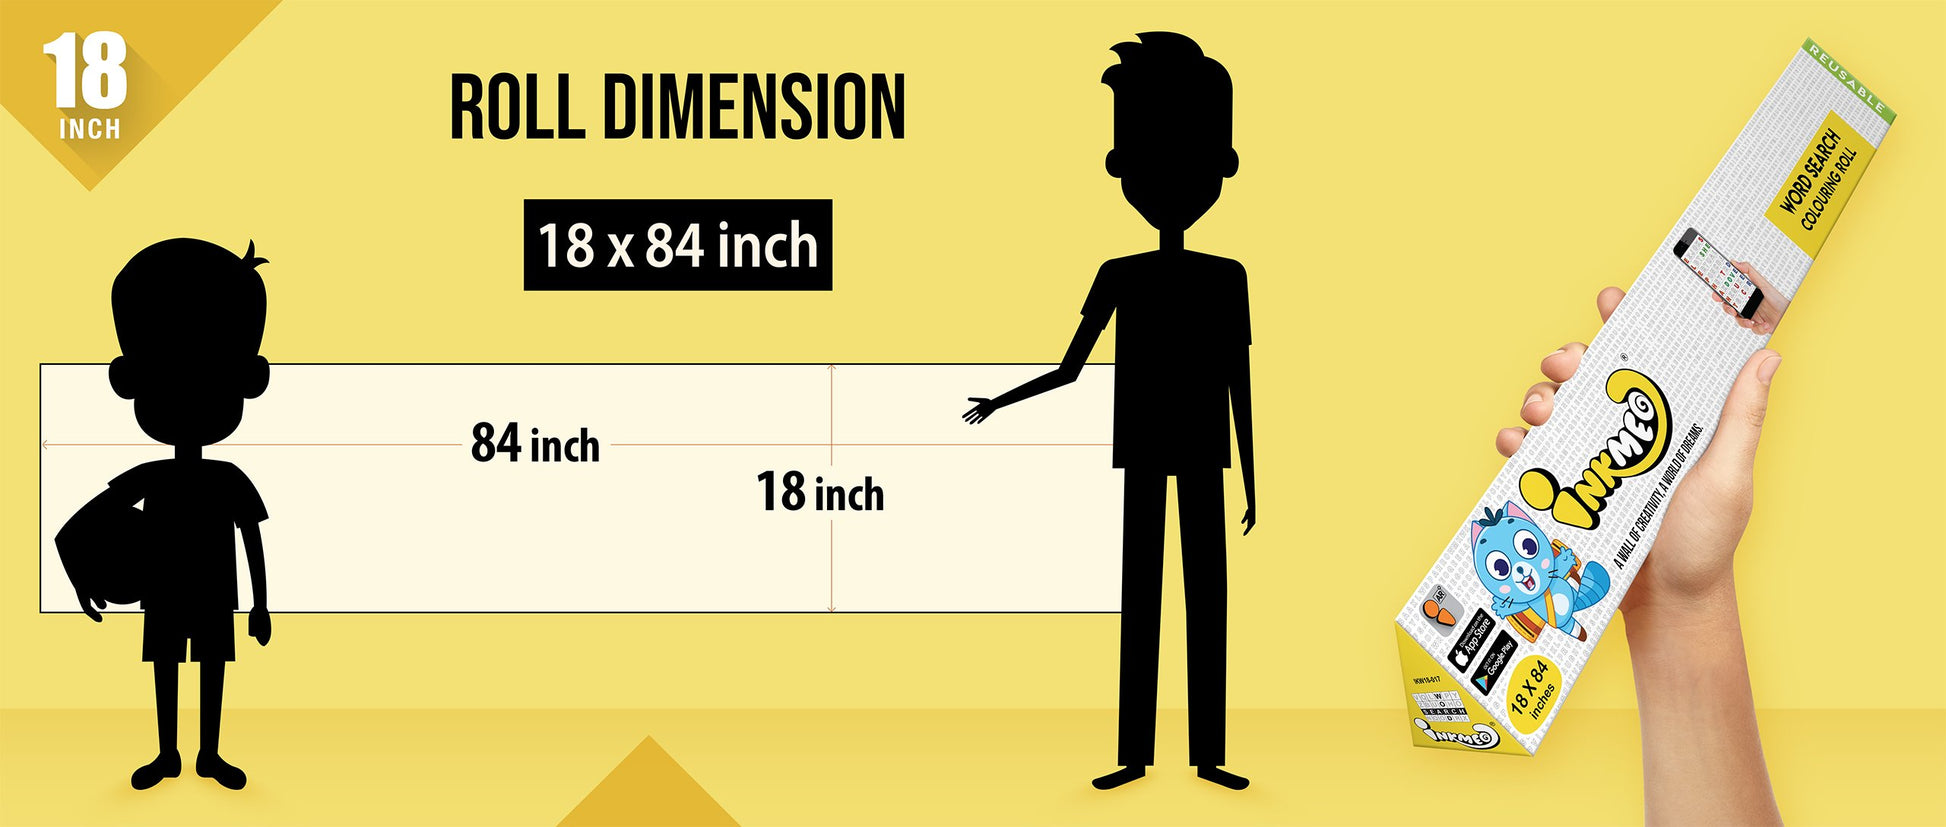 The image shows a yellow background with a ruler indicating child and adult height on an 18*84 inch paper roll dimension.